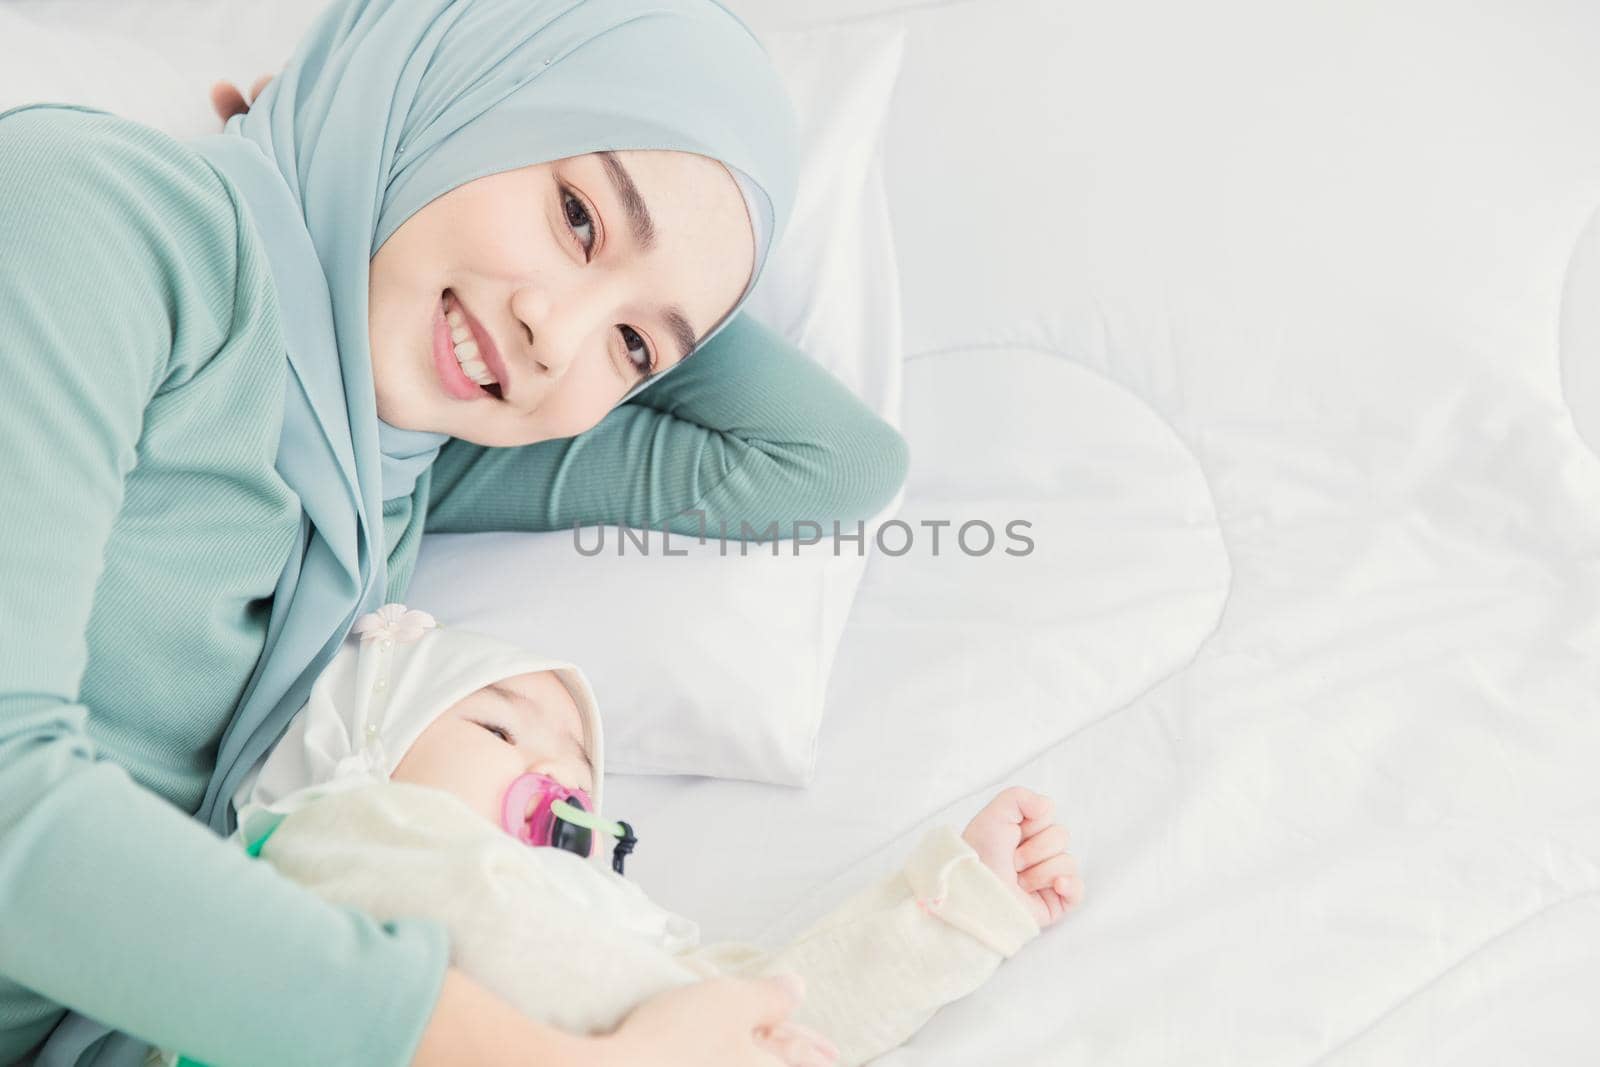 Muslim Hijab stay with her baby on white bed smiling at home, mother care infant.